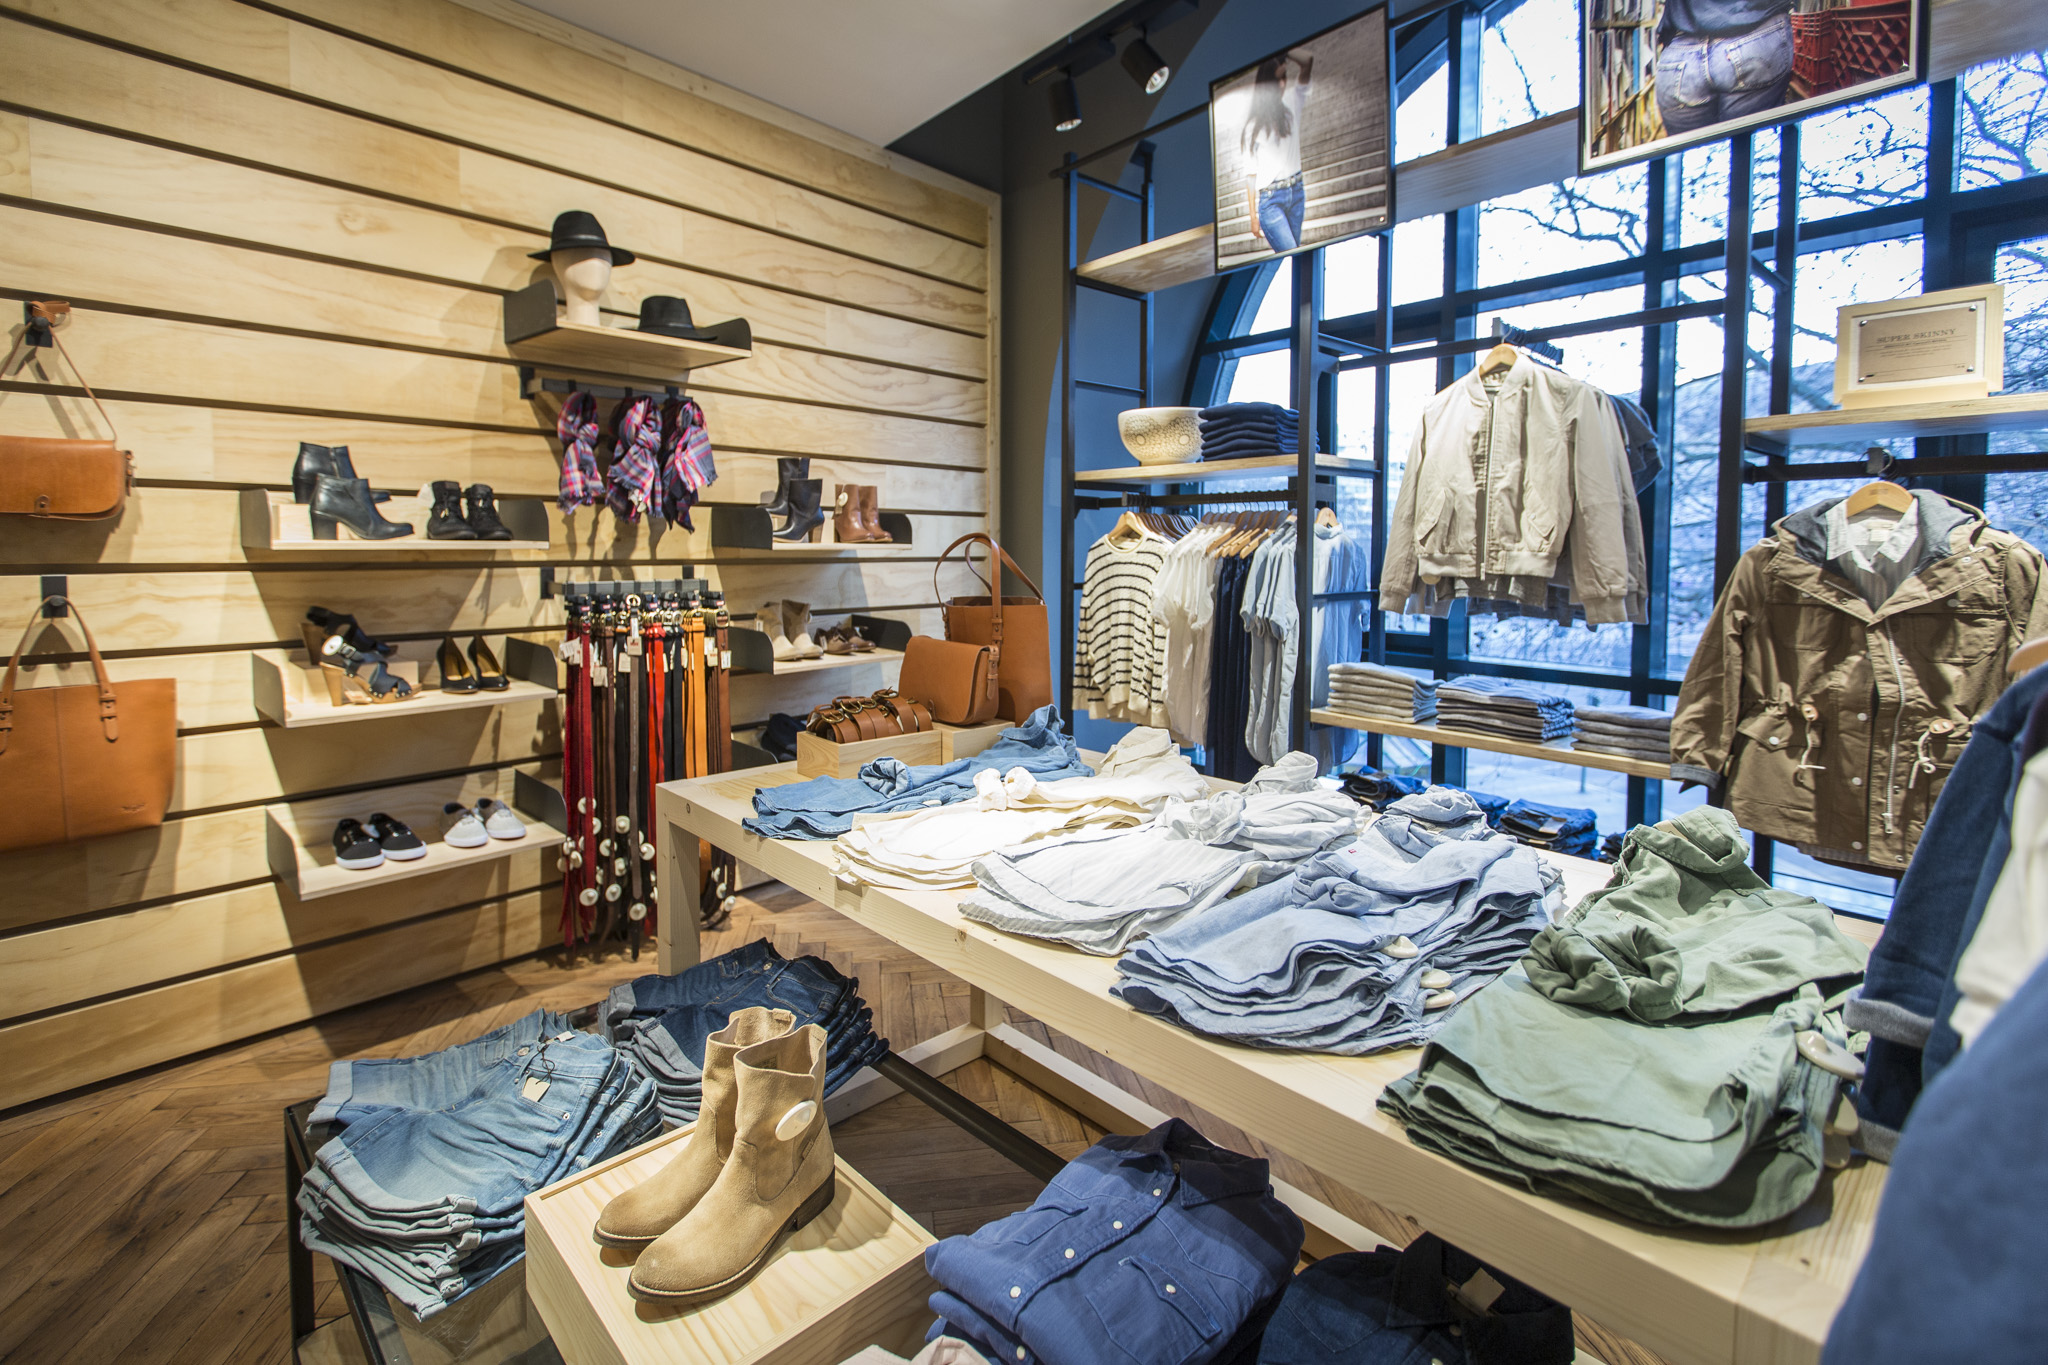 Step Inside The Renovated Levi's Berlin Store : Levi Strauss & Co